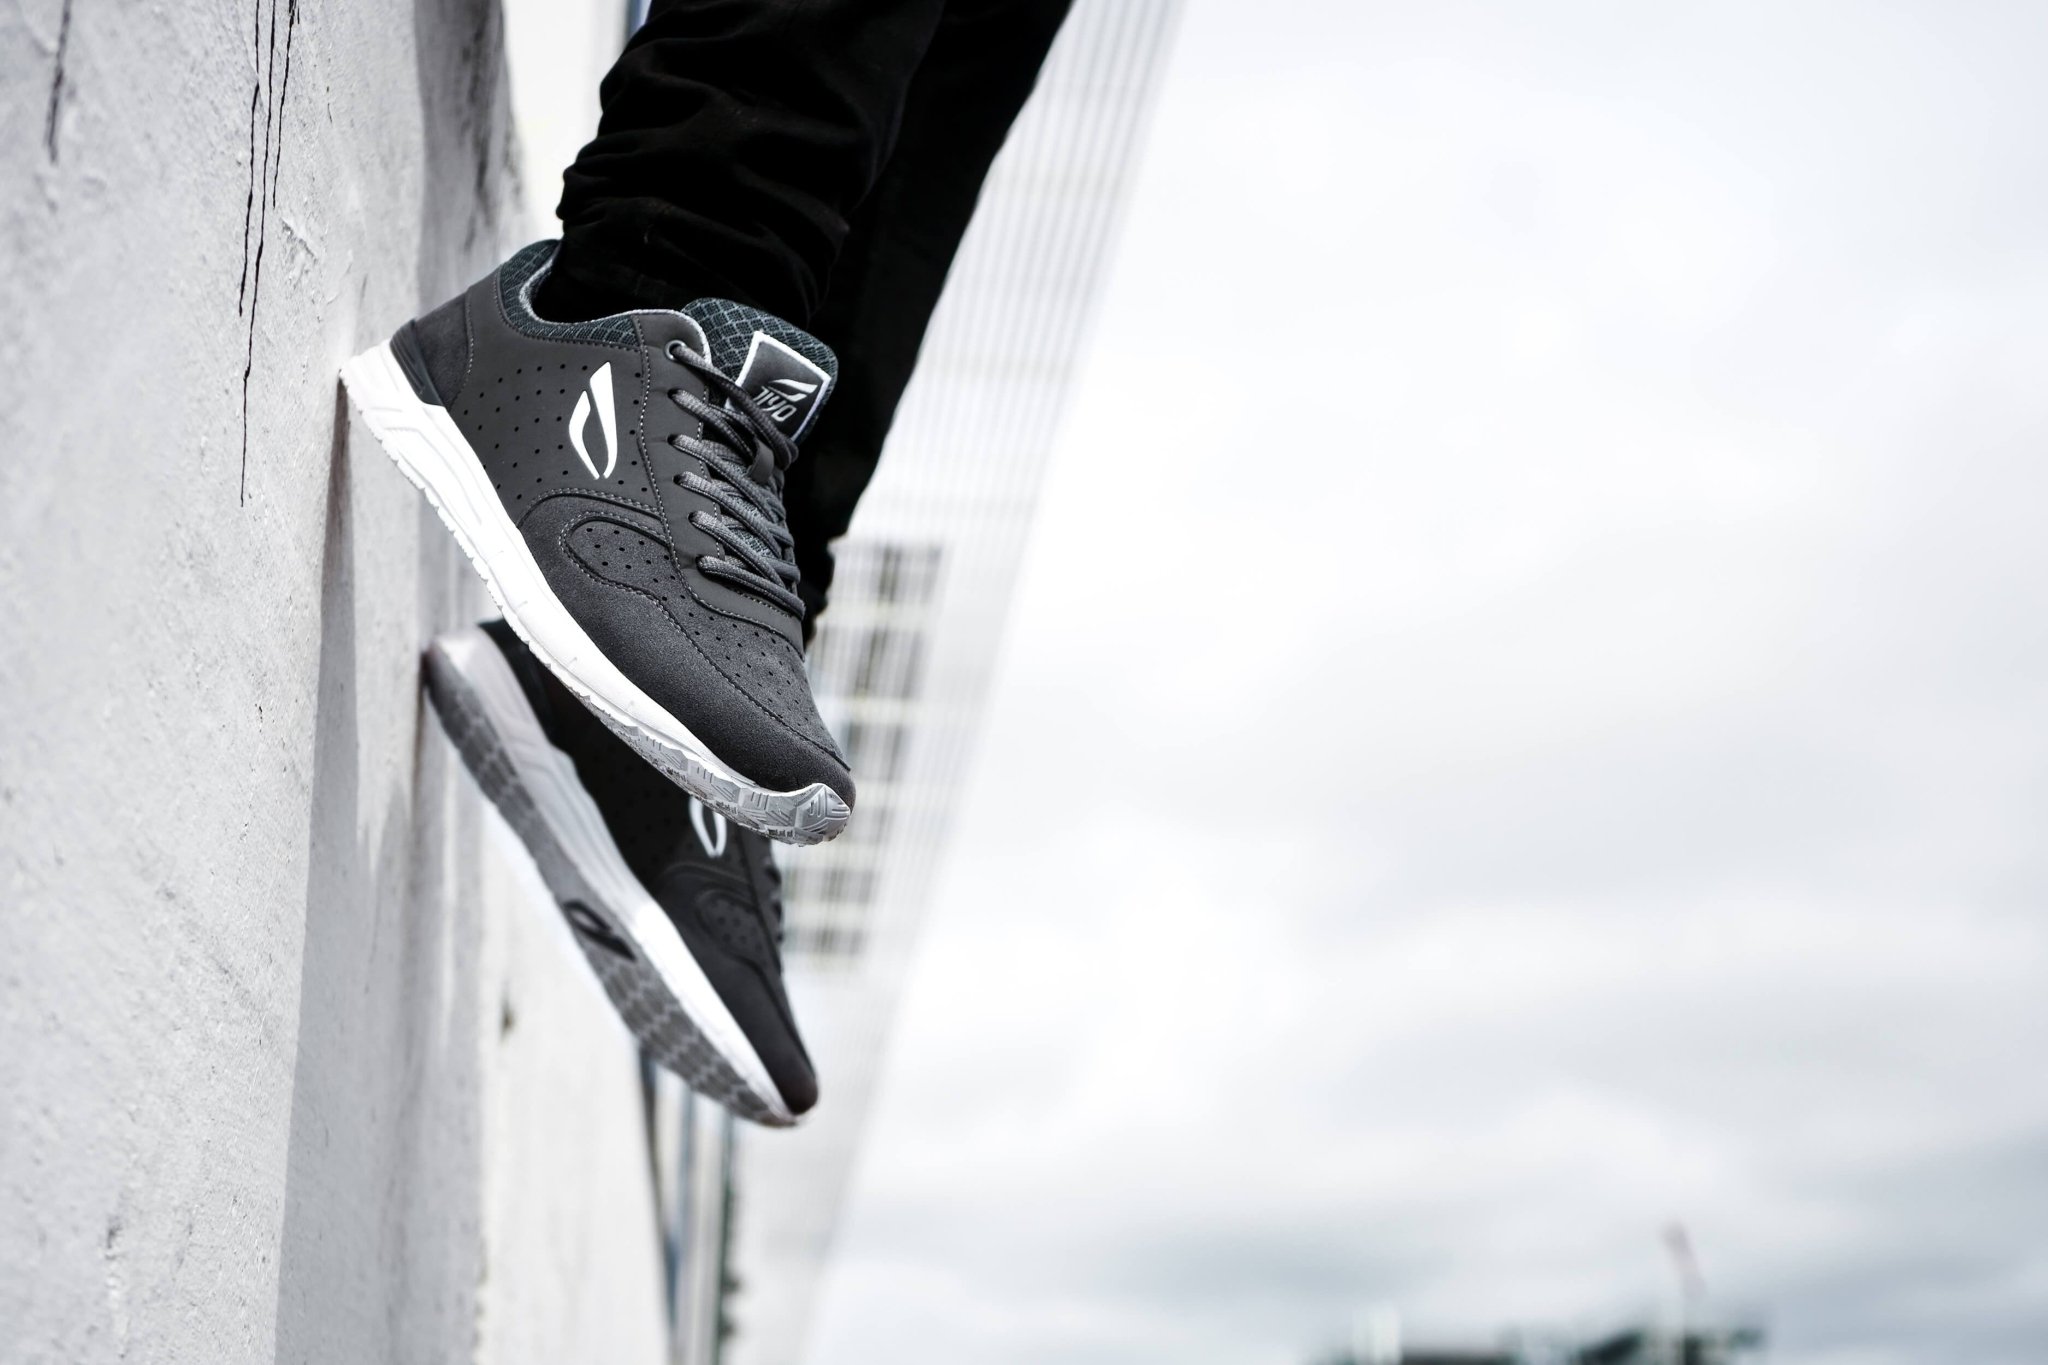 - JIYO Flow shoes - safely and avoid injuries.